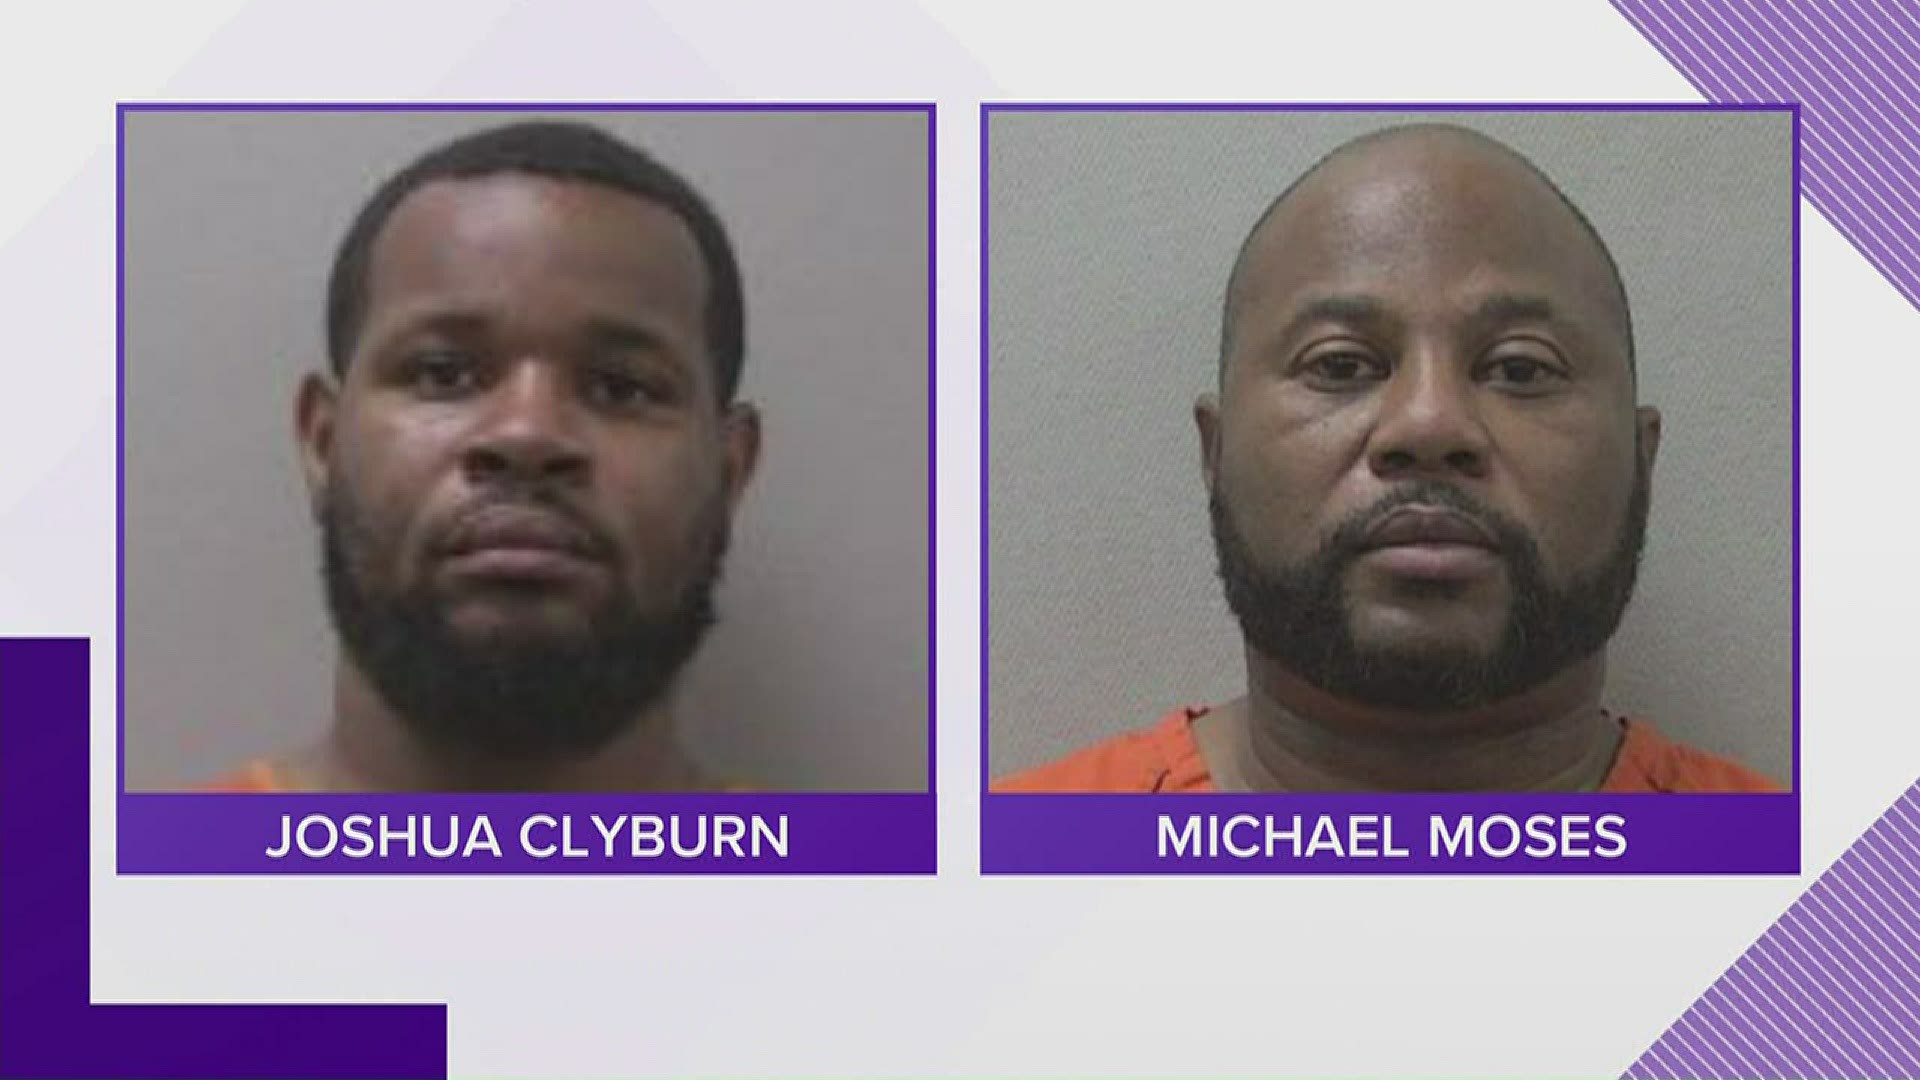 Investigators say seurity video shows Joshua Clyburn, 28 handing what is being described as 'forbidden items' to an inmate Michael Moses.